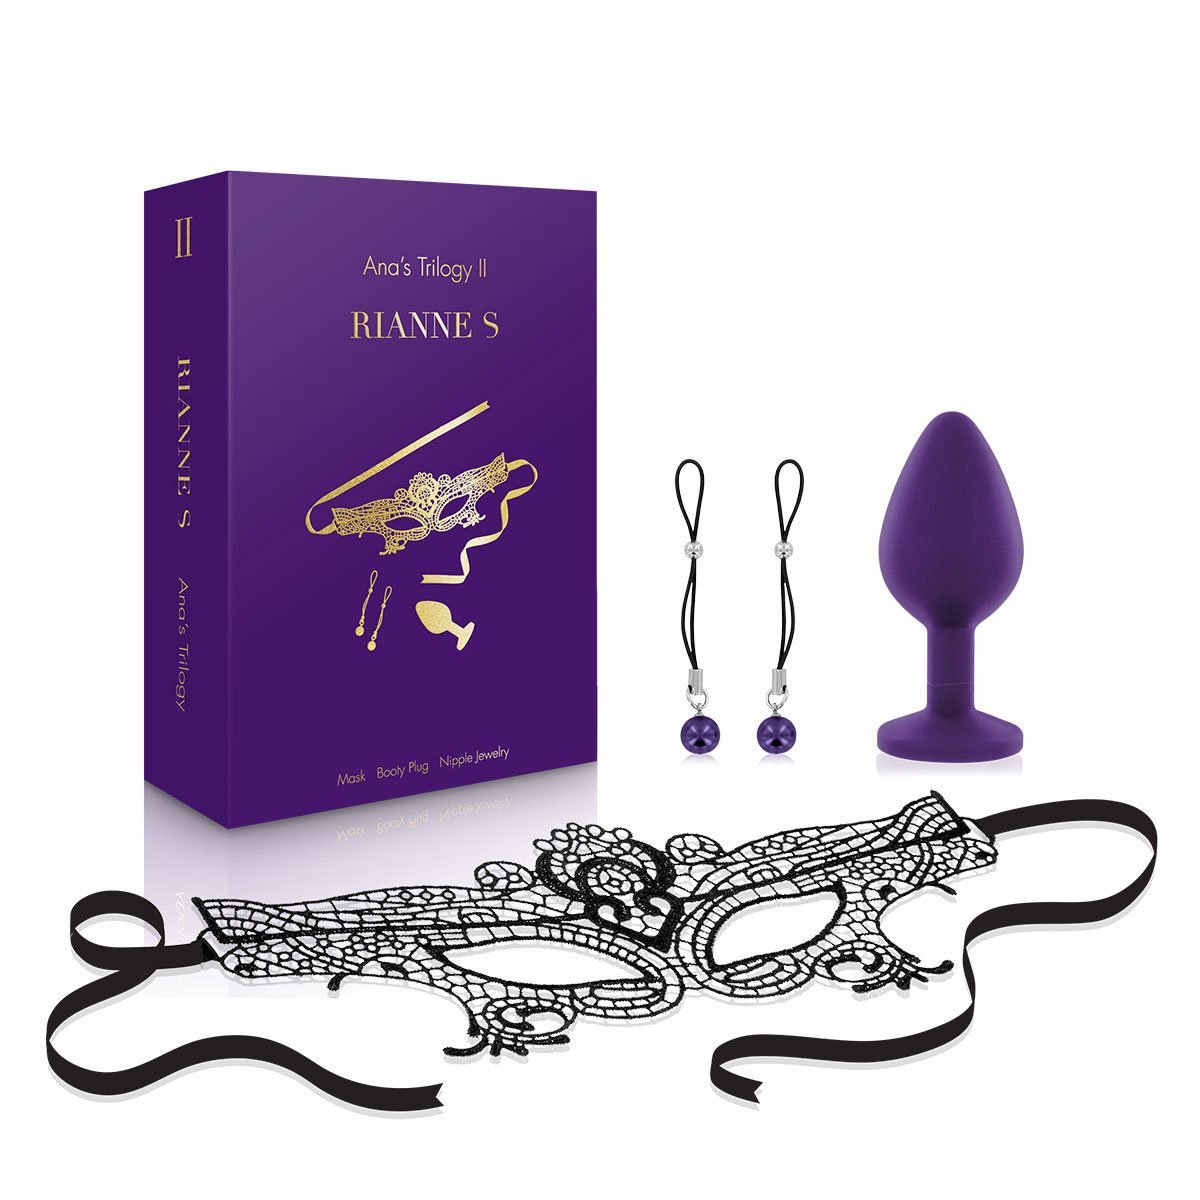 Rianne S Ana's Trilogy Kit 2 with Mask, Nipple Jewels, and Butt Plug - Sex Toys